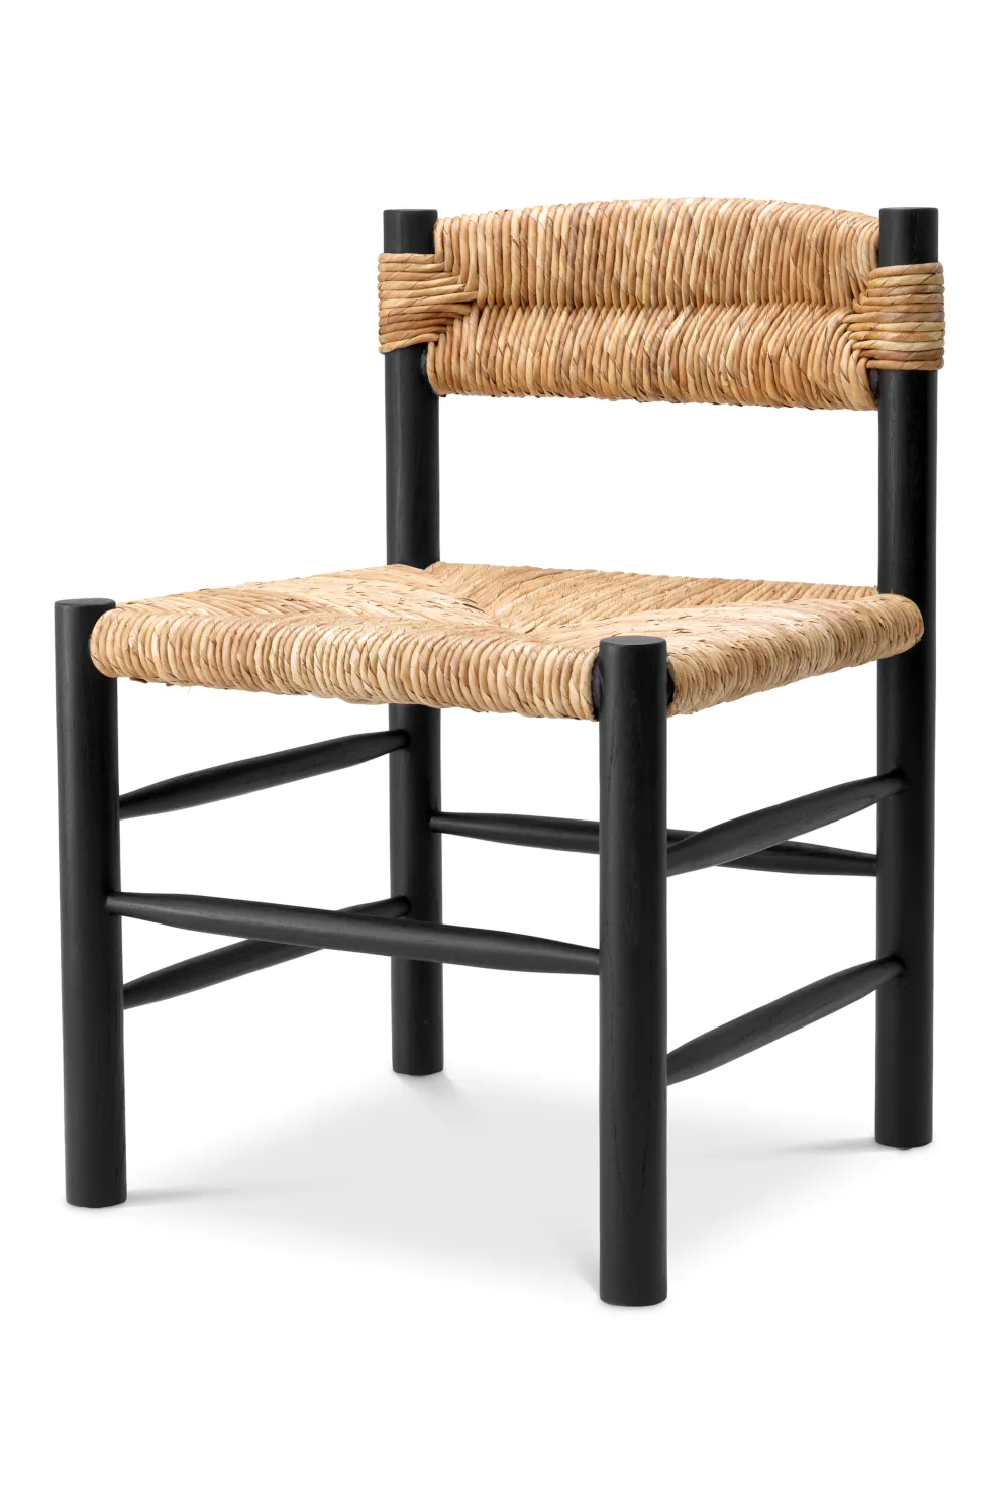 Woven Seagrass Dining Chair | Eichholtz Cosby | Oroa.com